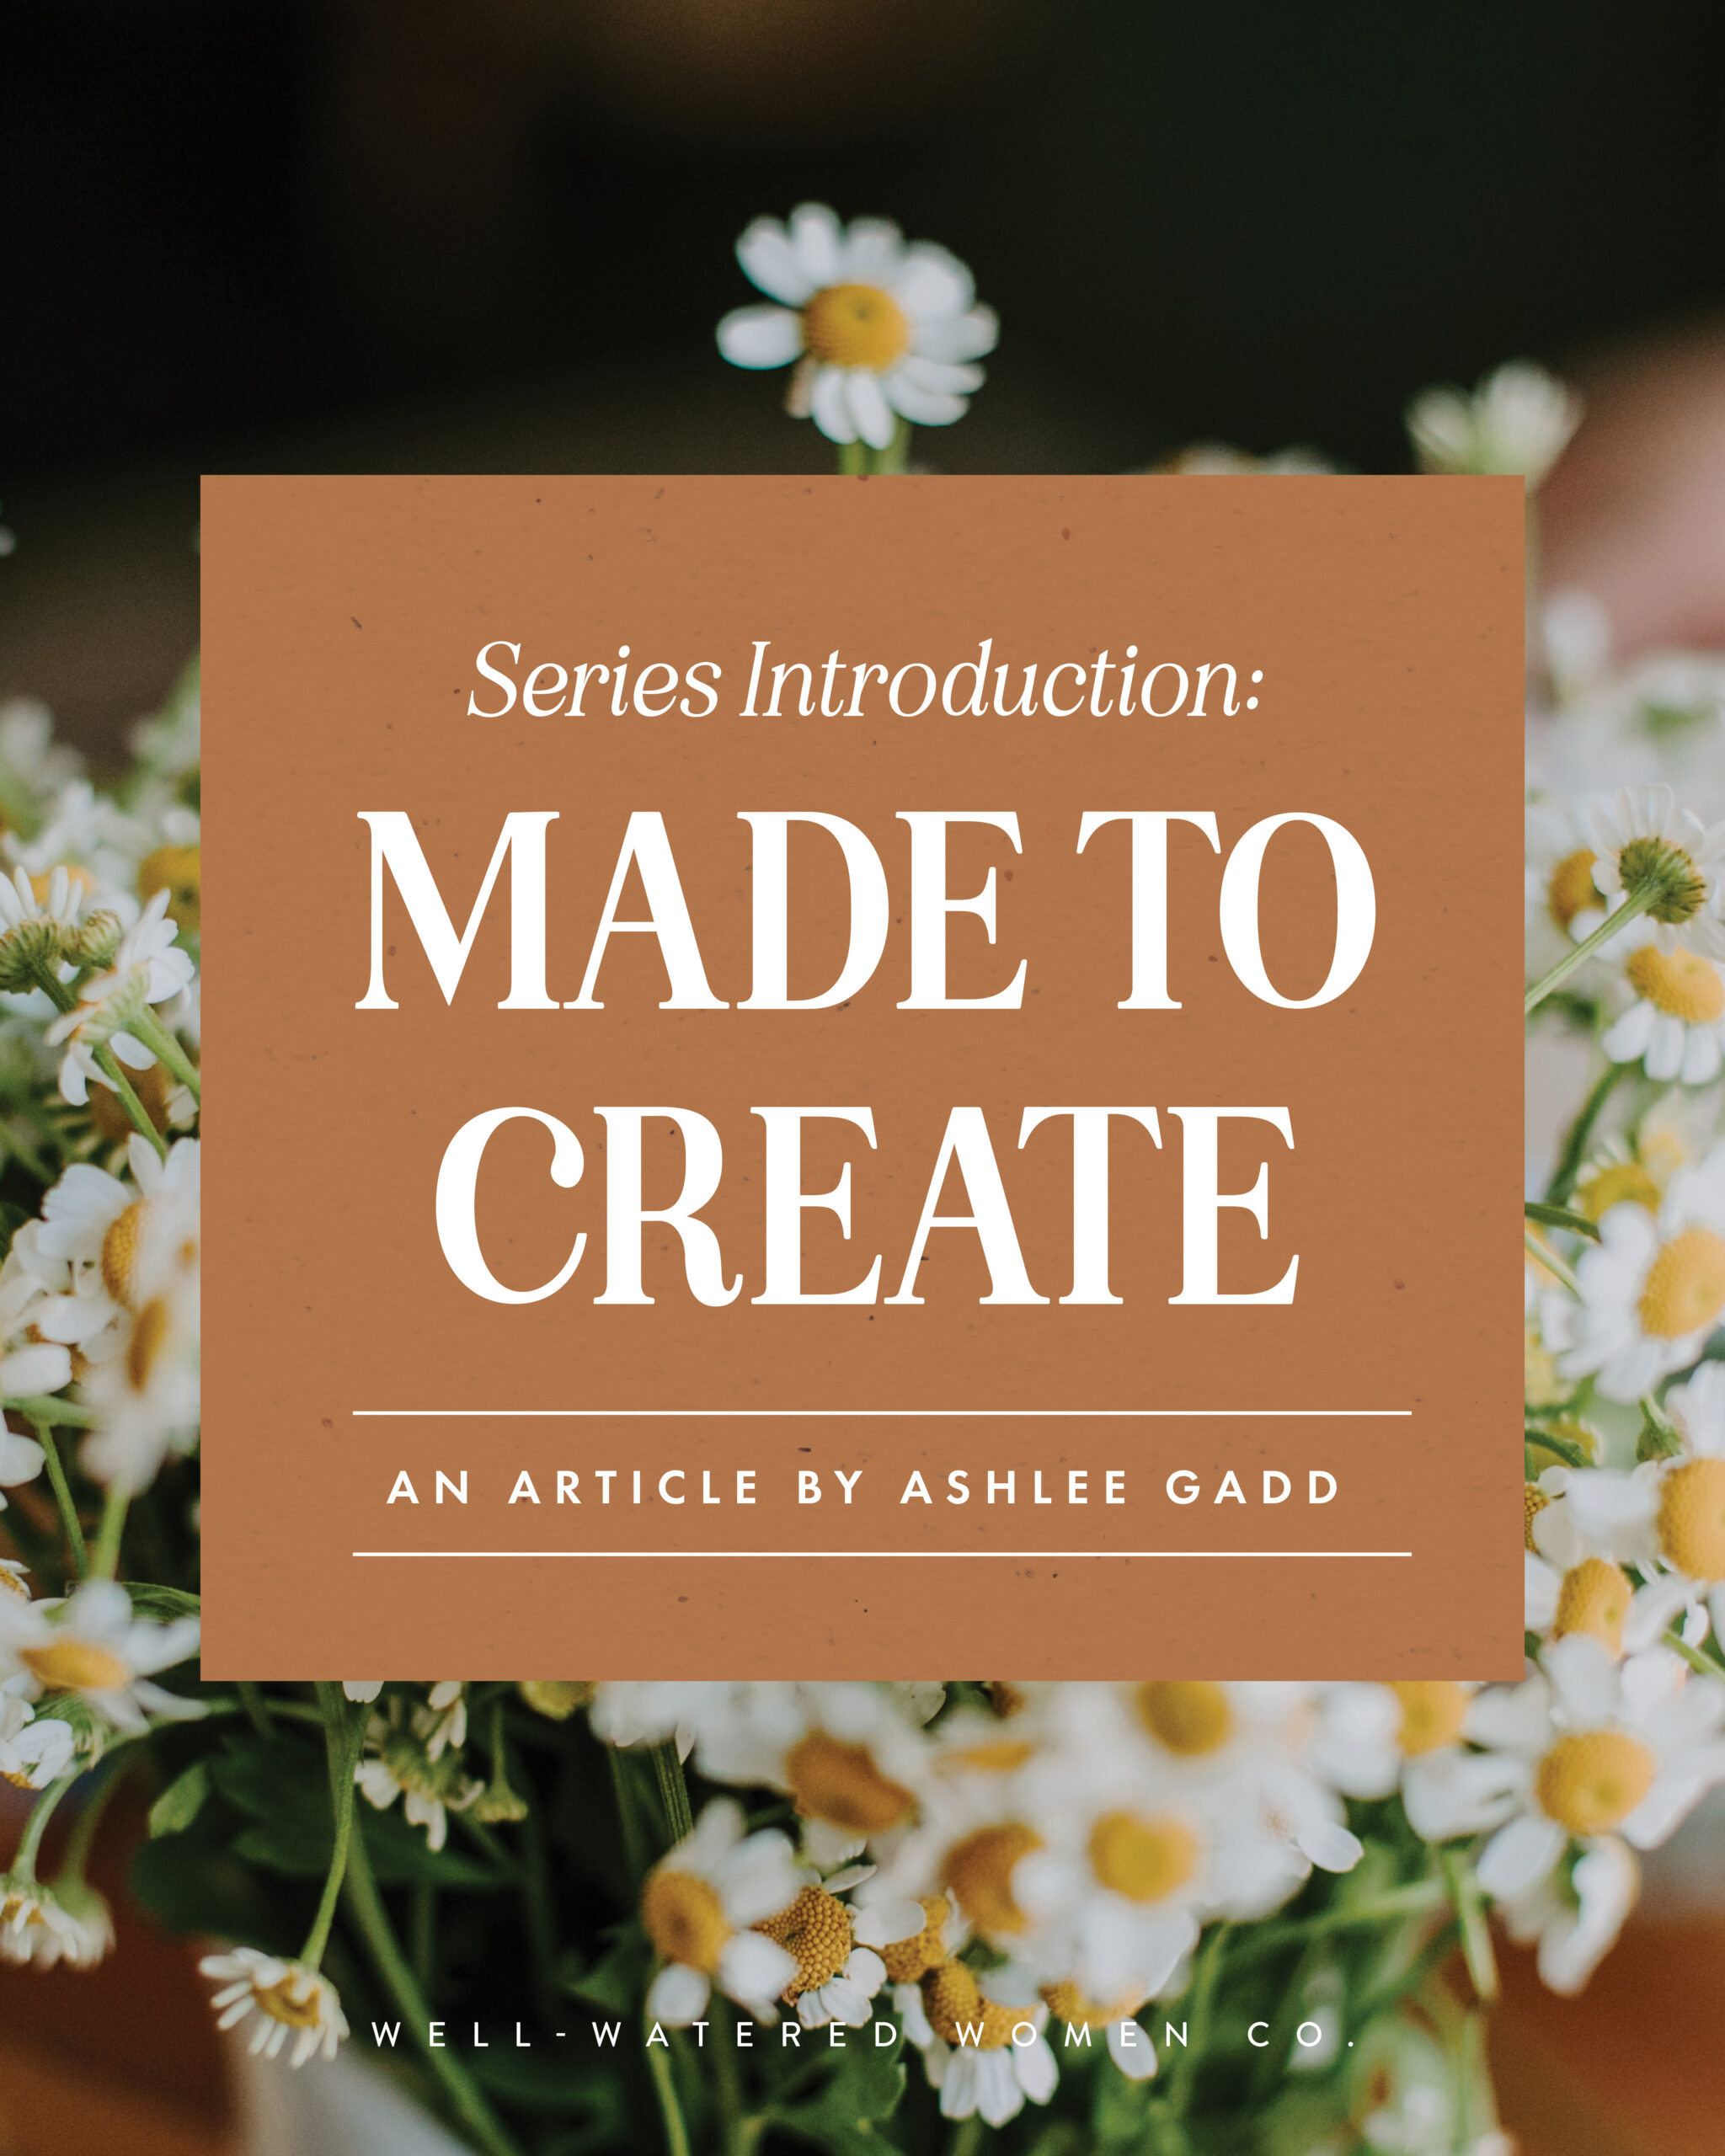 Made to Create - an article from Well-Watered Women